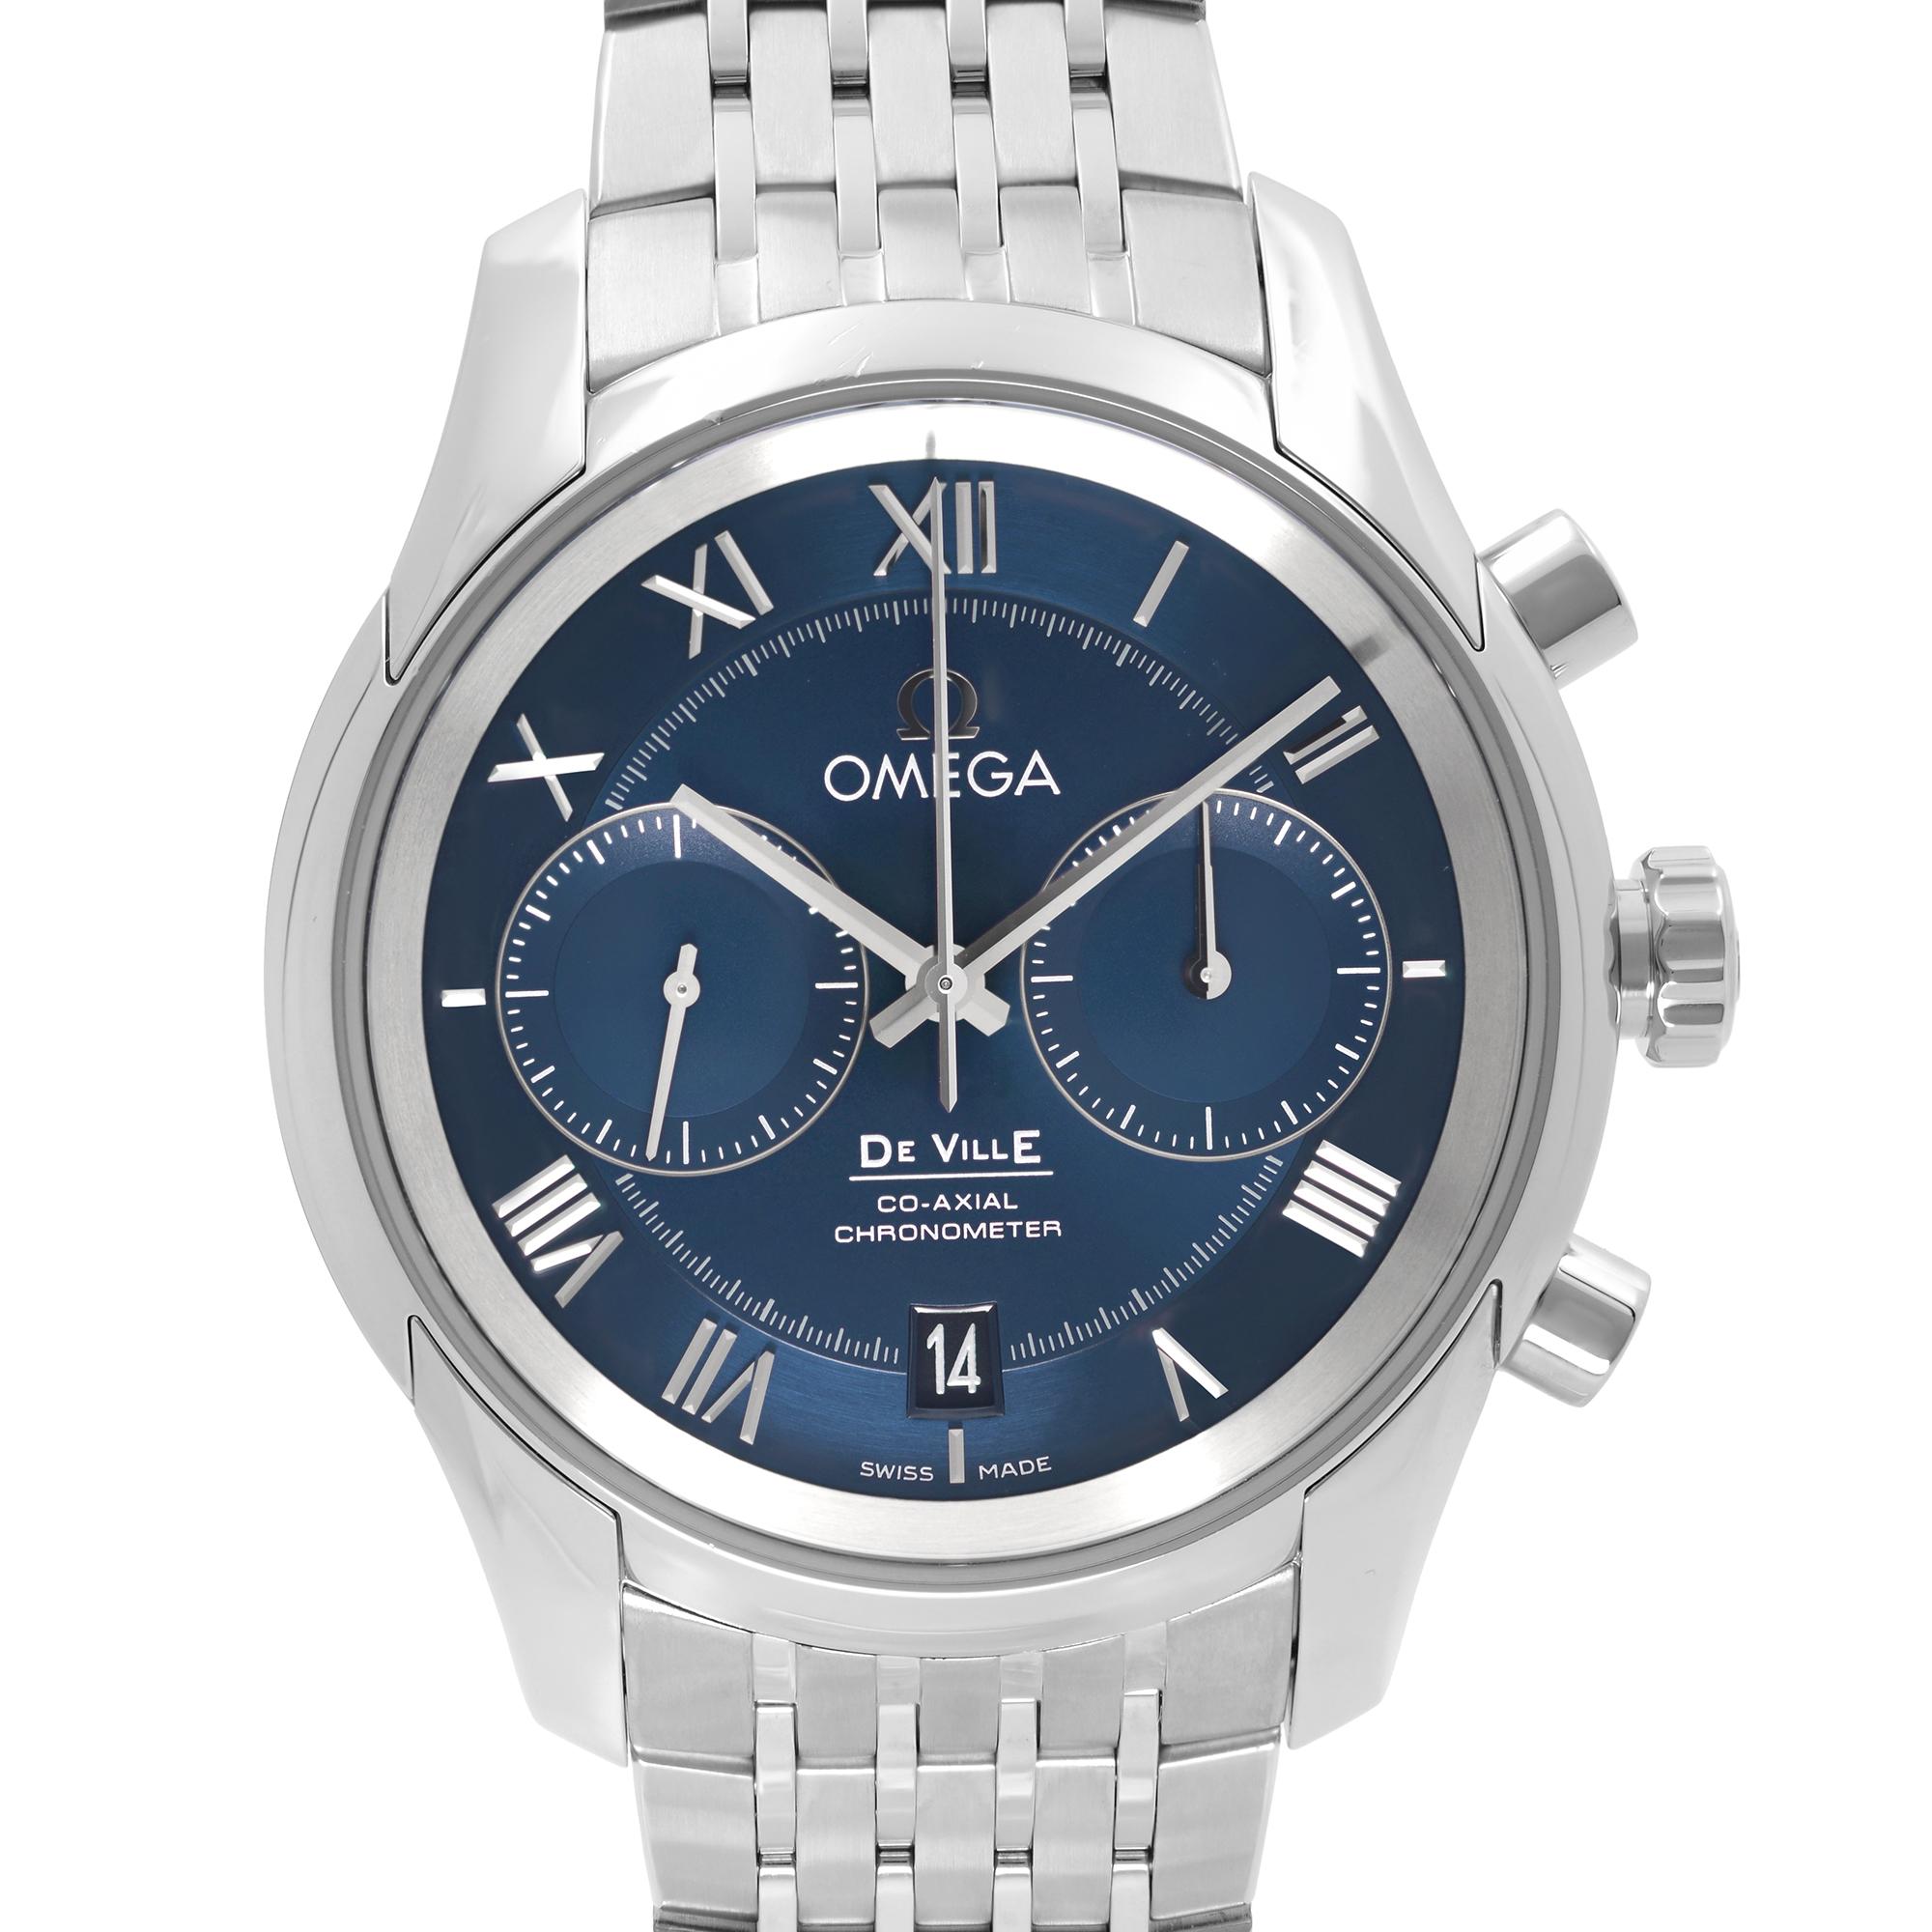 Display Model Omega De Ville Stainless Steel Blue Dial Men's Watch 431.10.42.51.03.001. This Beautiful Timepiece Features:  Silver-Tone Stainless Steel Case With a Silver-Tone Stainless Steel Bracelet. Fixed Silver-Tone Stainless Steel Bezel. Blue